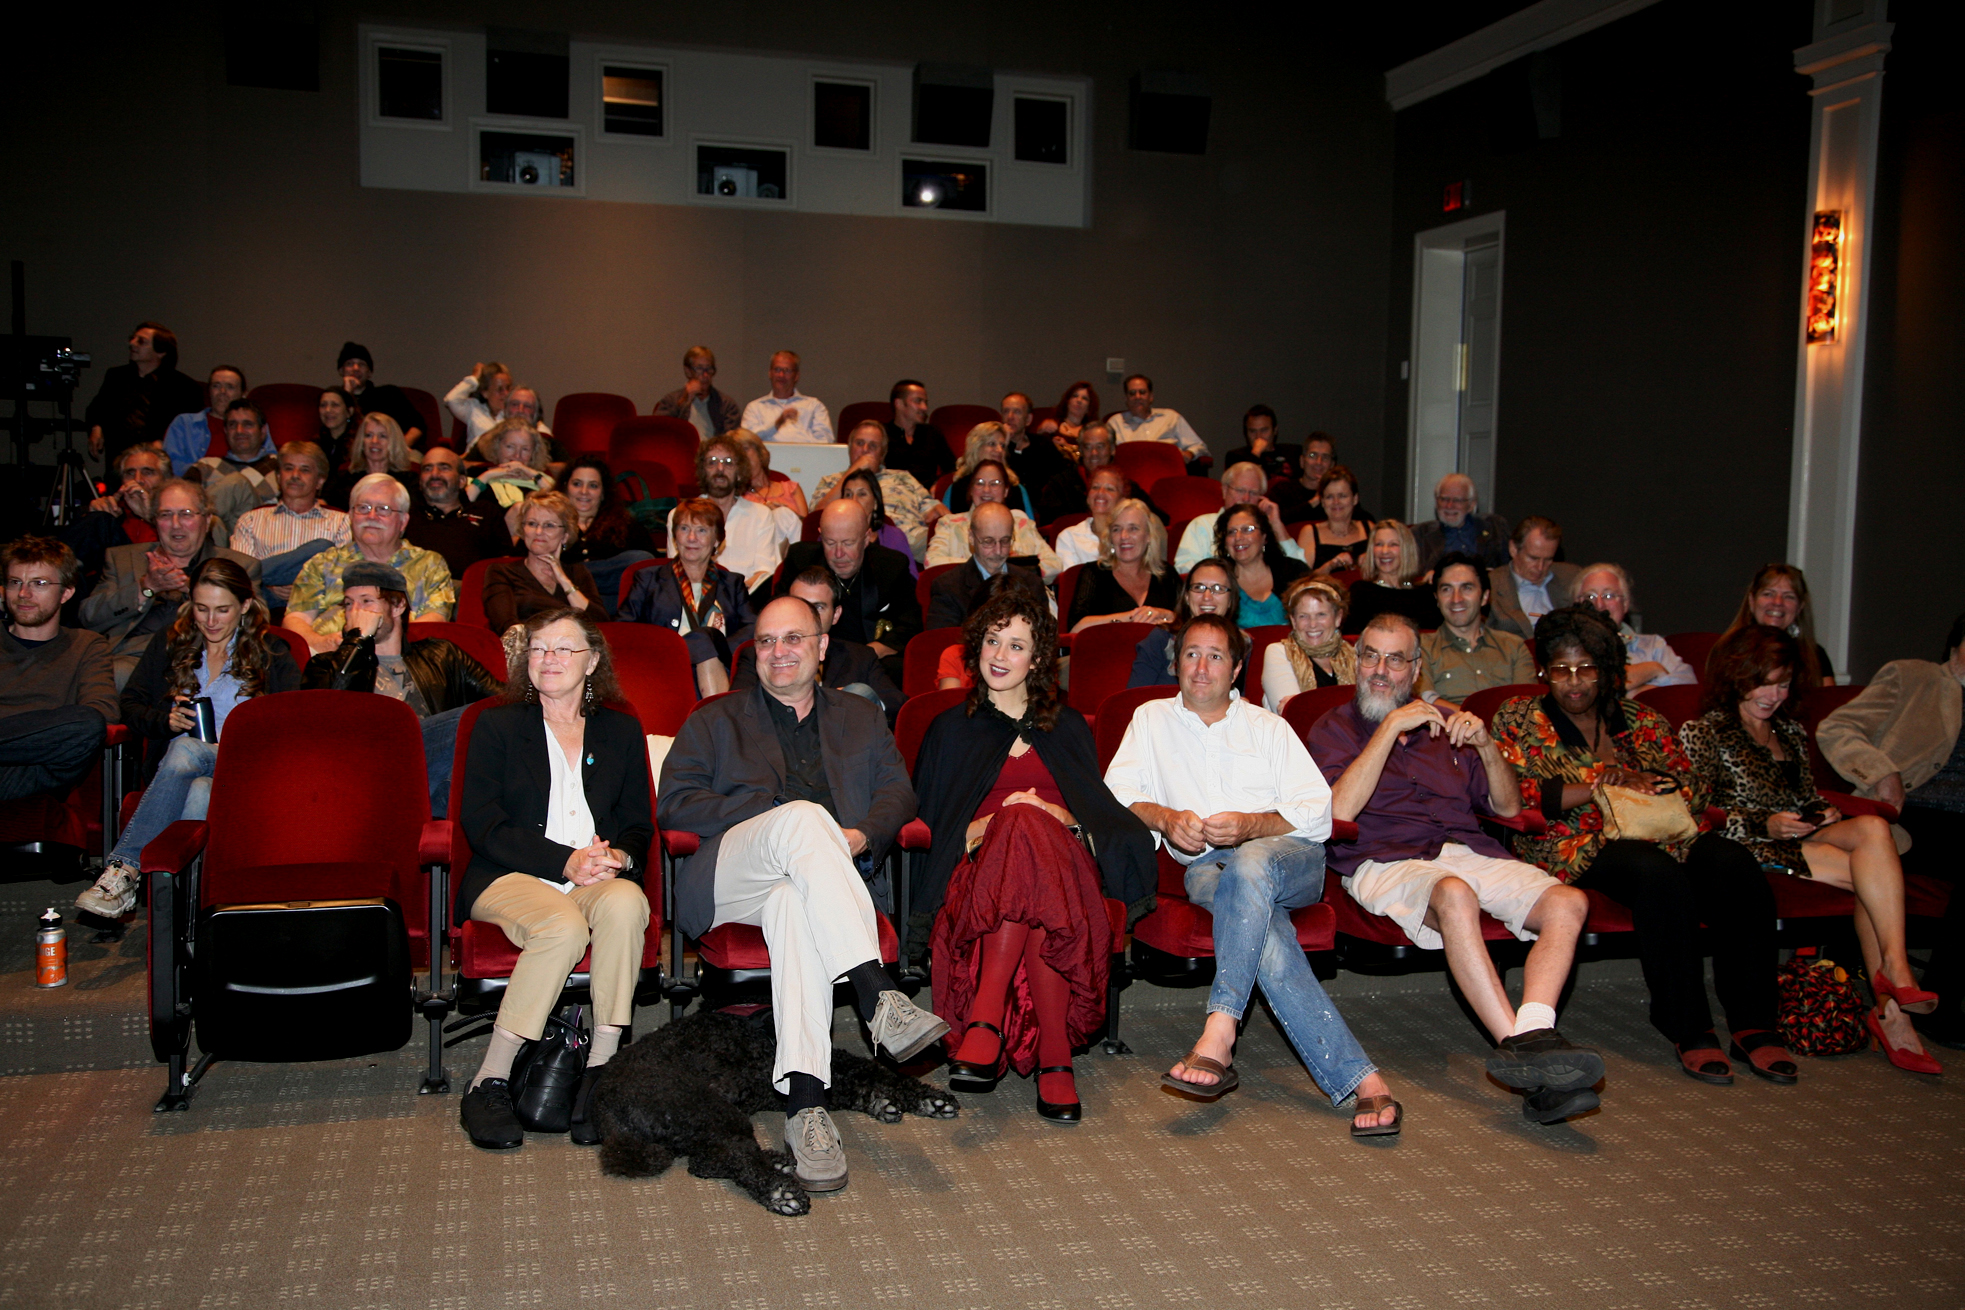 Audience during Q&A Cecile B. De Mille Screening including First row, John Matysiak (2nd AD), Clio Tegel (Production Manager), Melinda 9Comedian) Fortunato Corpio (Cinematographer), Austin Strauss (Poet), Wanda Coleman (Poet), Lisa Robins (Actor).